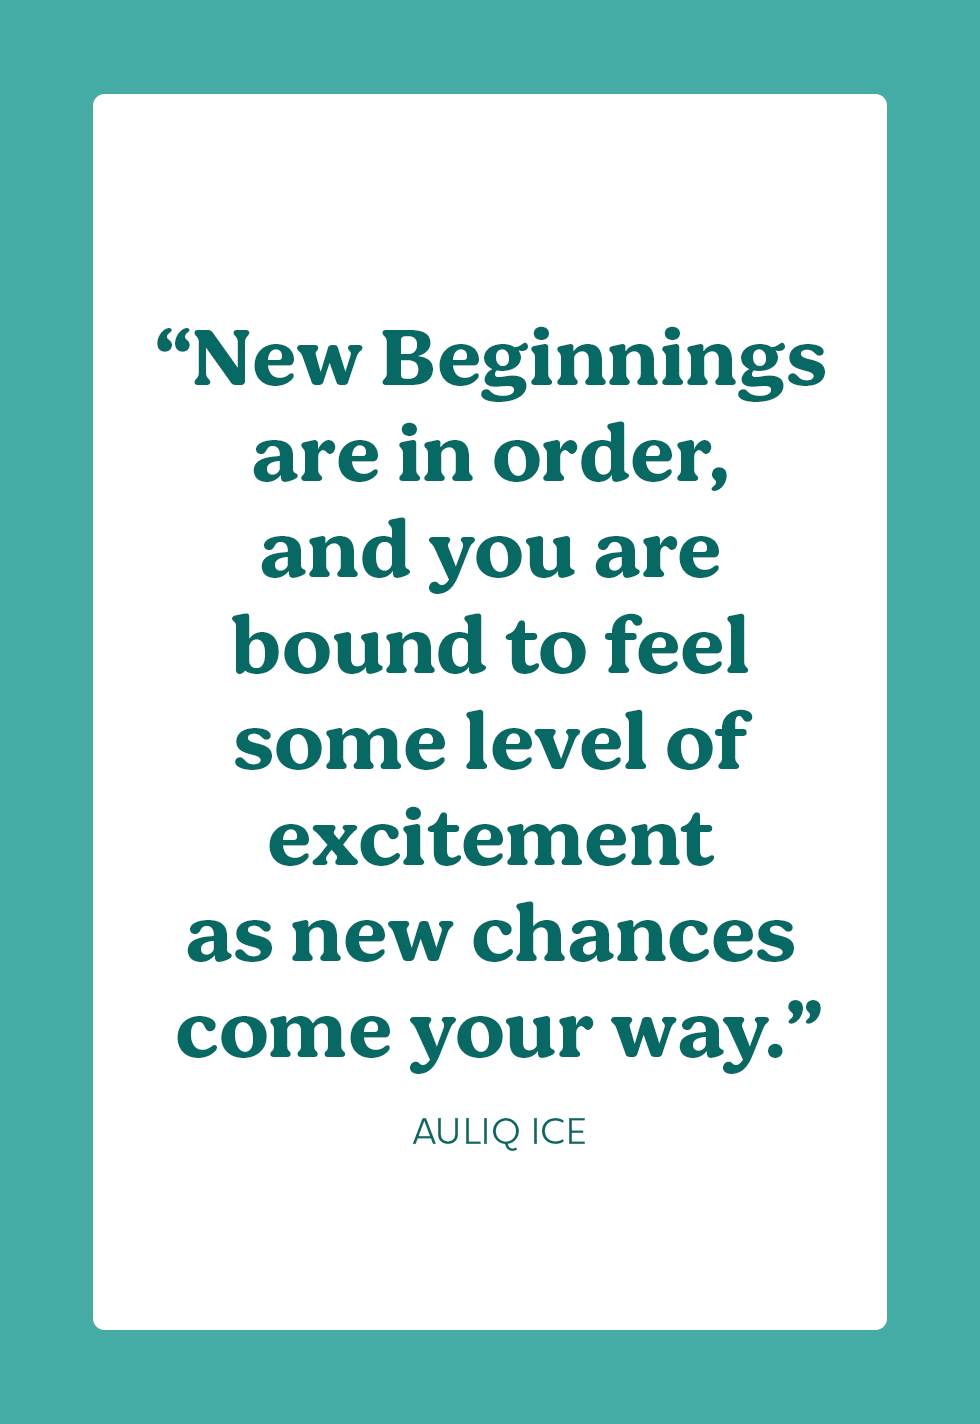 19 Fresh Start Quotes for a New Beginning